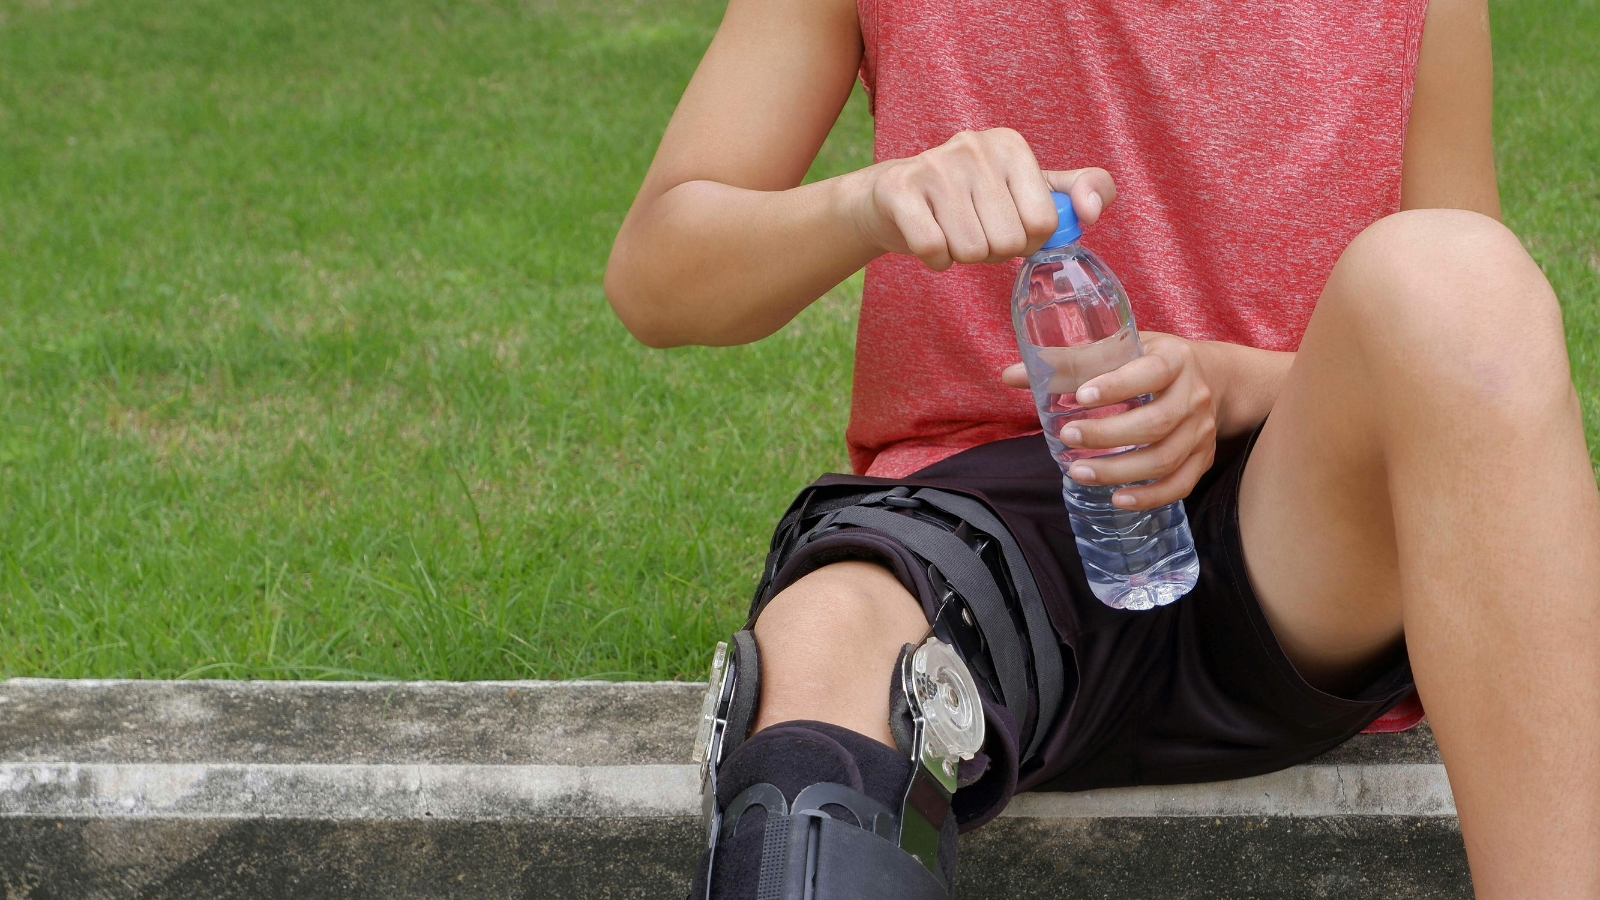 Player with knee brace holding water bottle